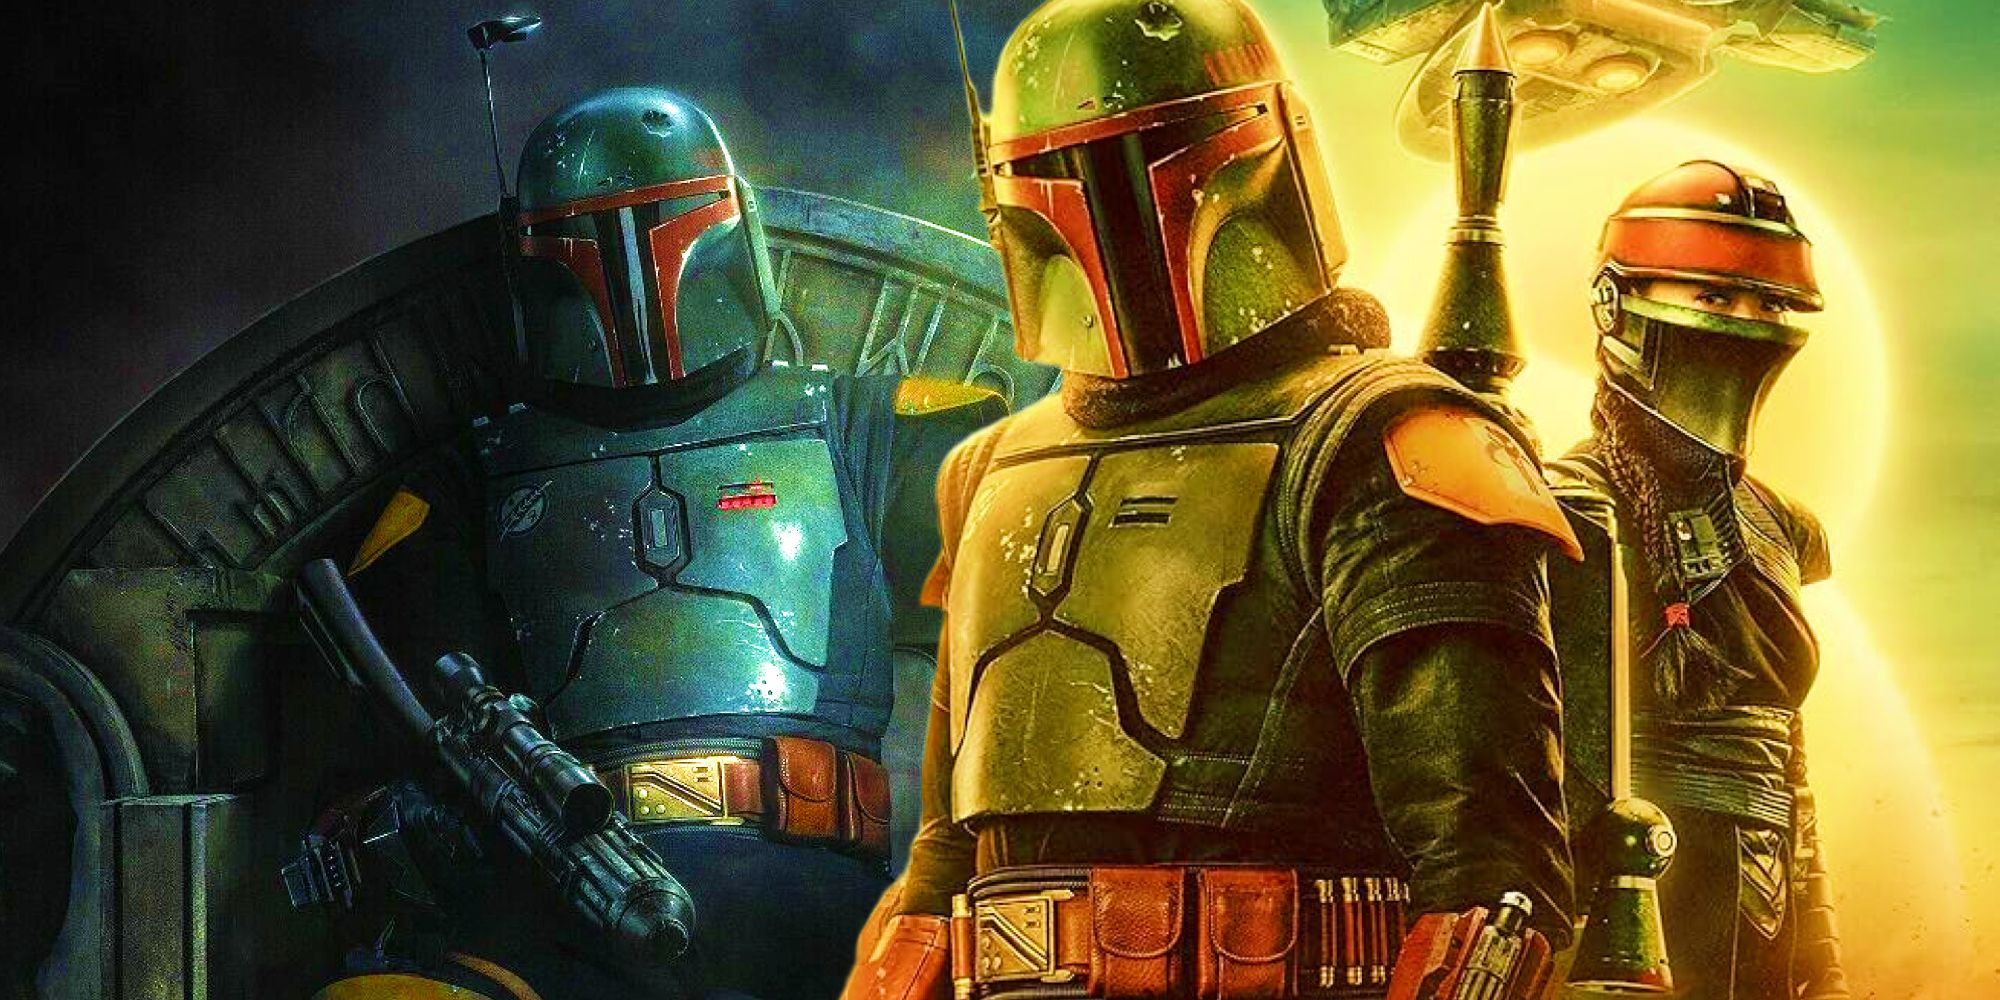 Boba sitting on his throne next to Boba Fett and Fennec Shand in the two posters for The Book of Boba Fett